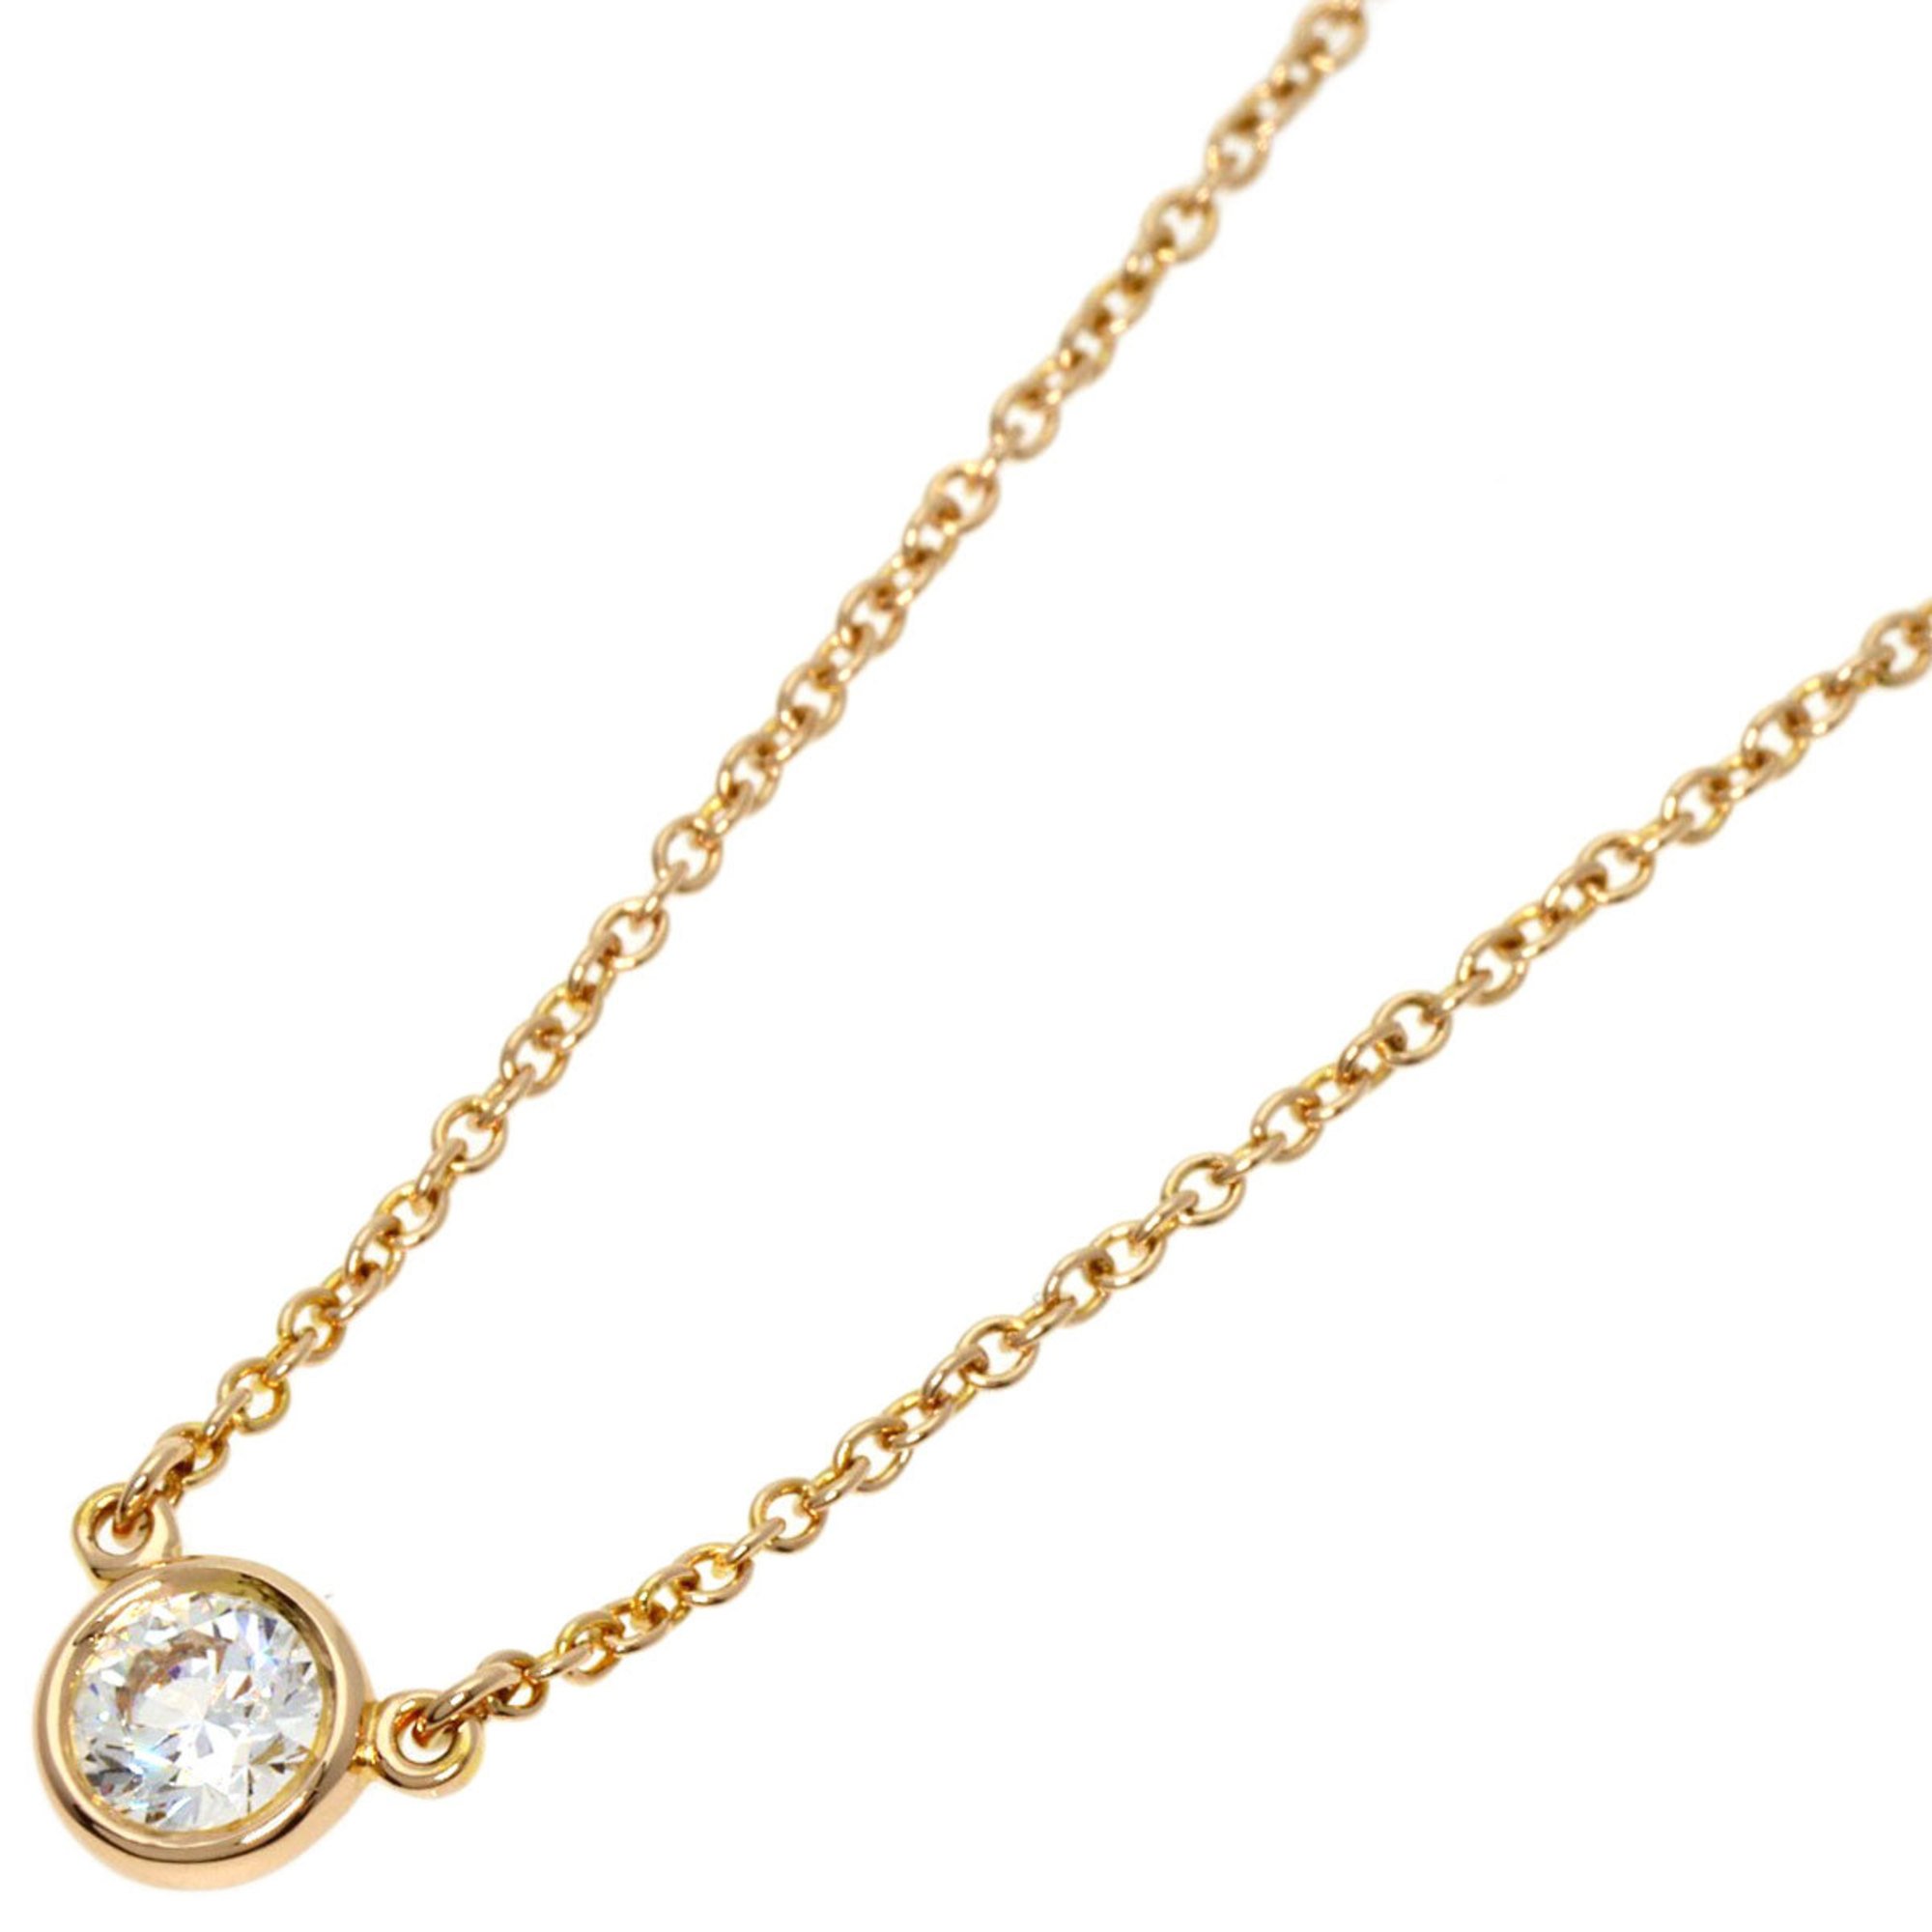 Tiffany by the Yard 1P Diamond Necklace K18 Pink Gold Women's